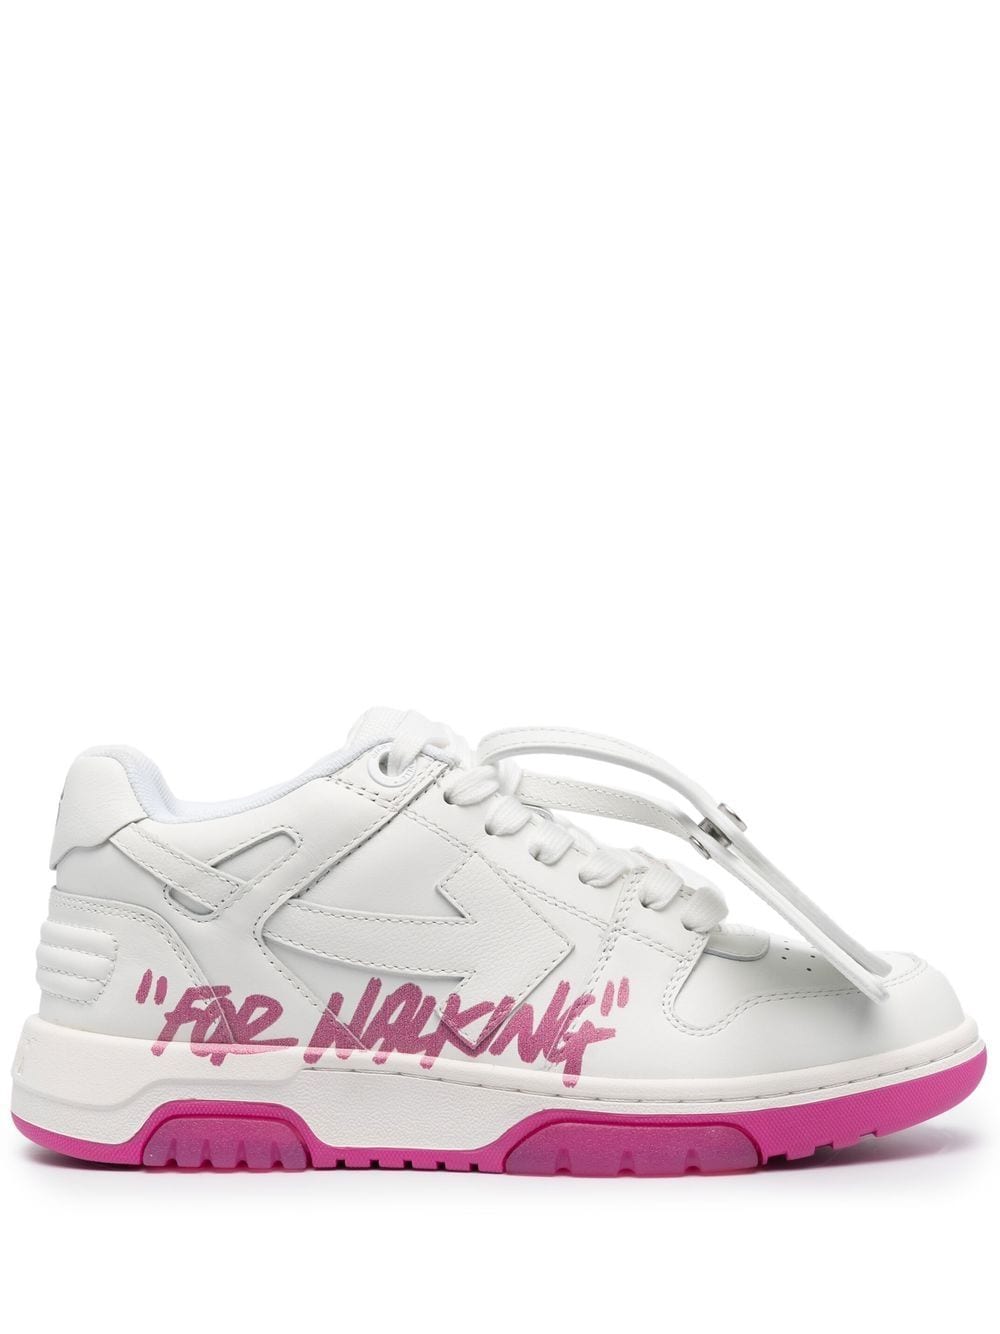 slogan-print lace-up sneakers Profile Picture